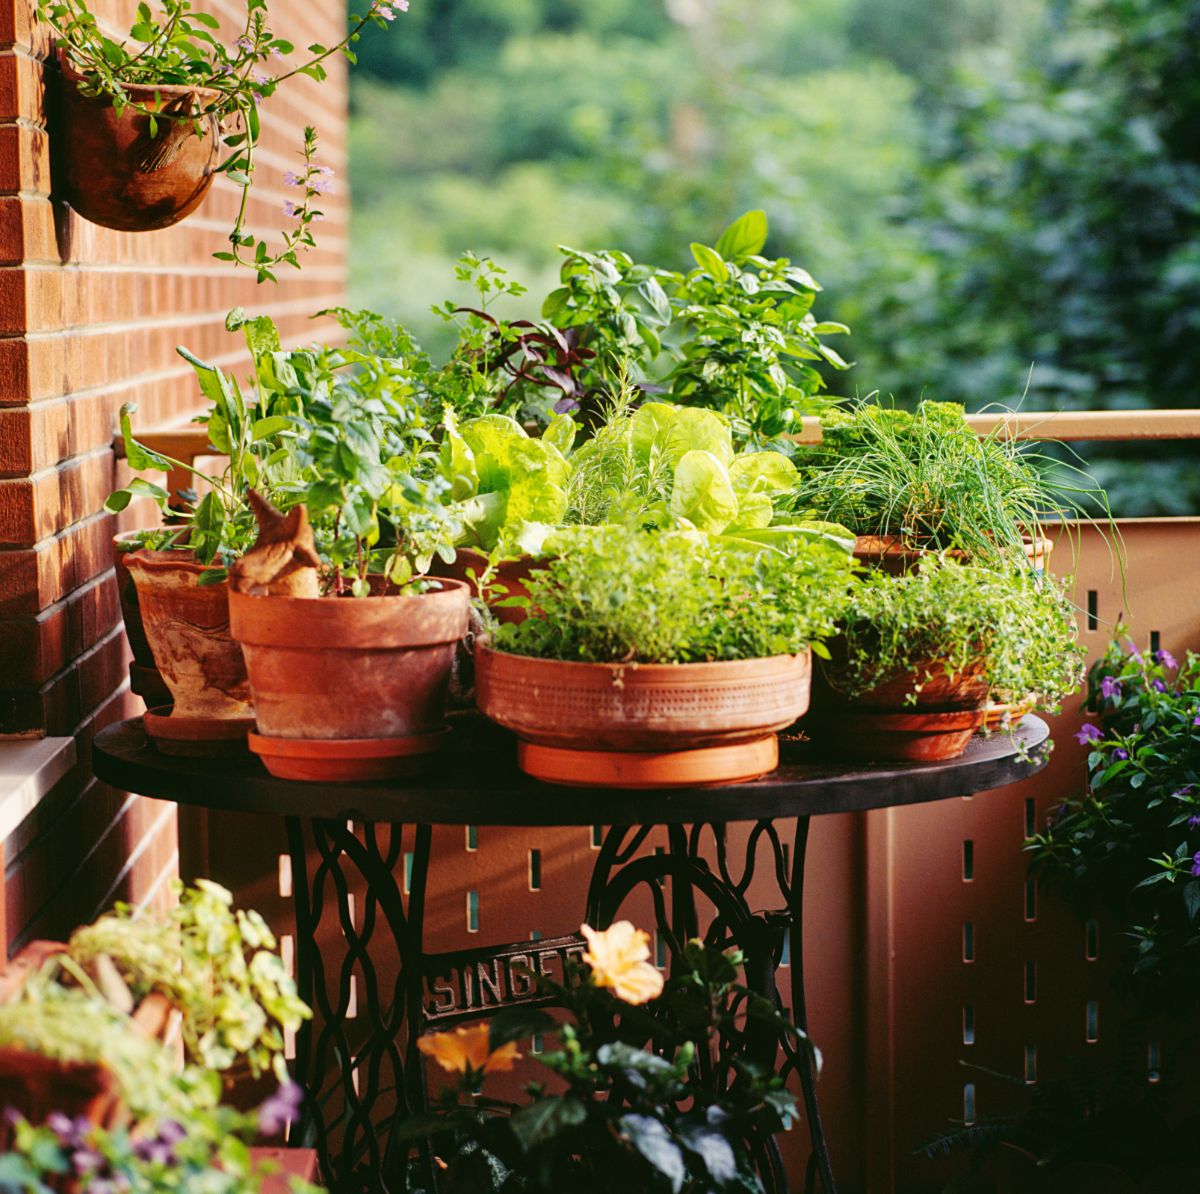 Pretty edible vegetable garden in rustic containers on a porch